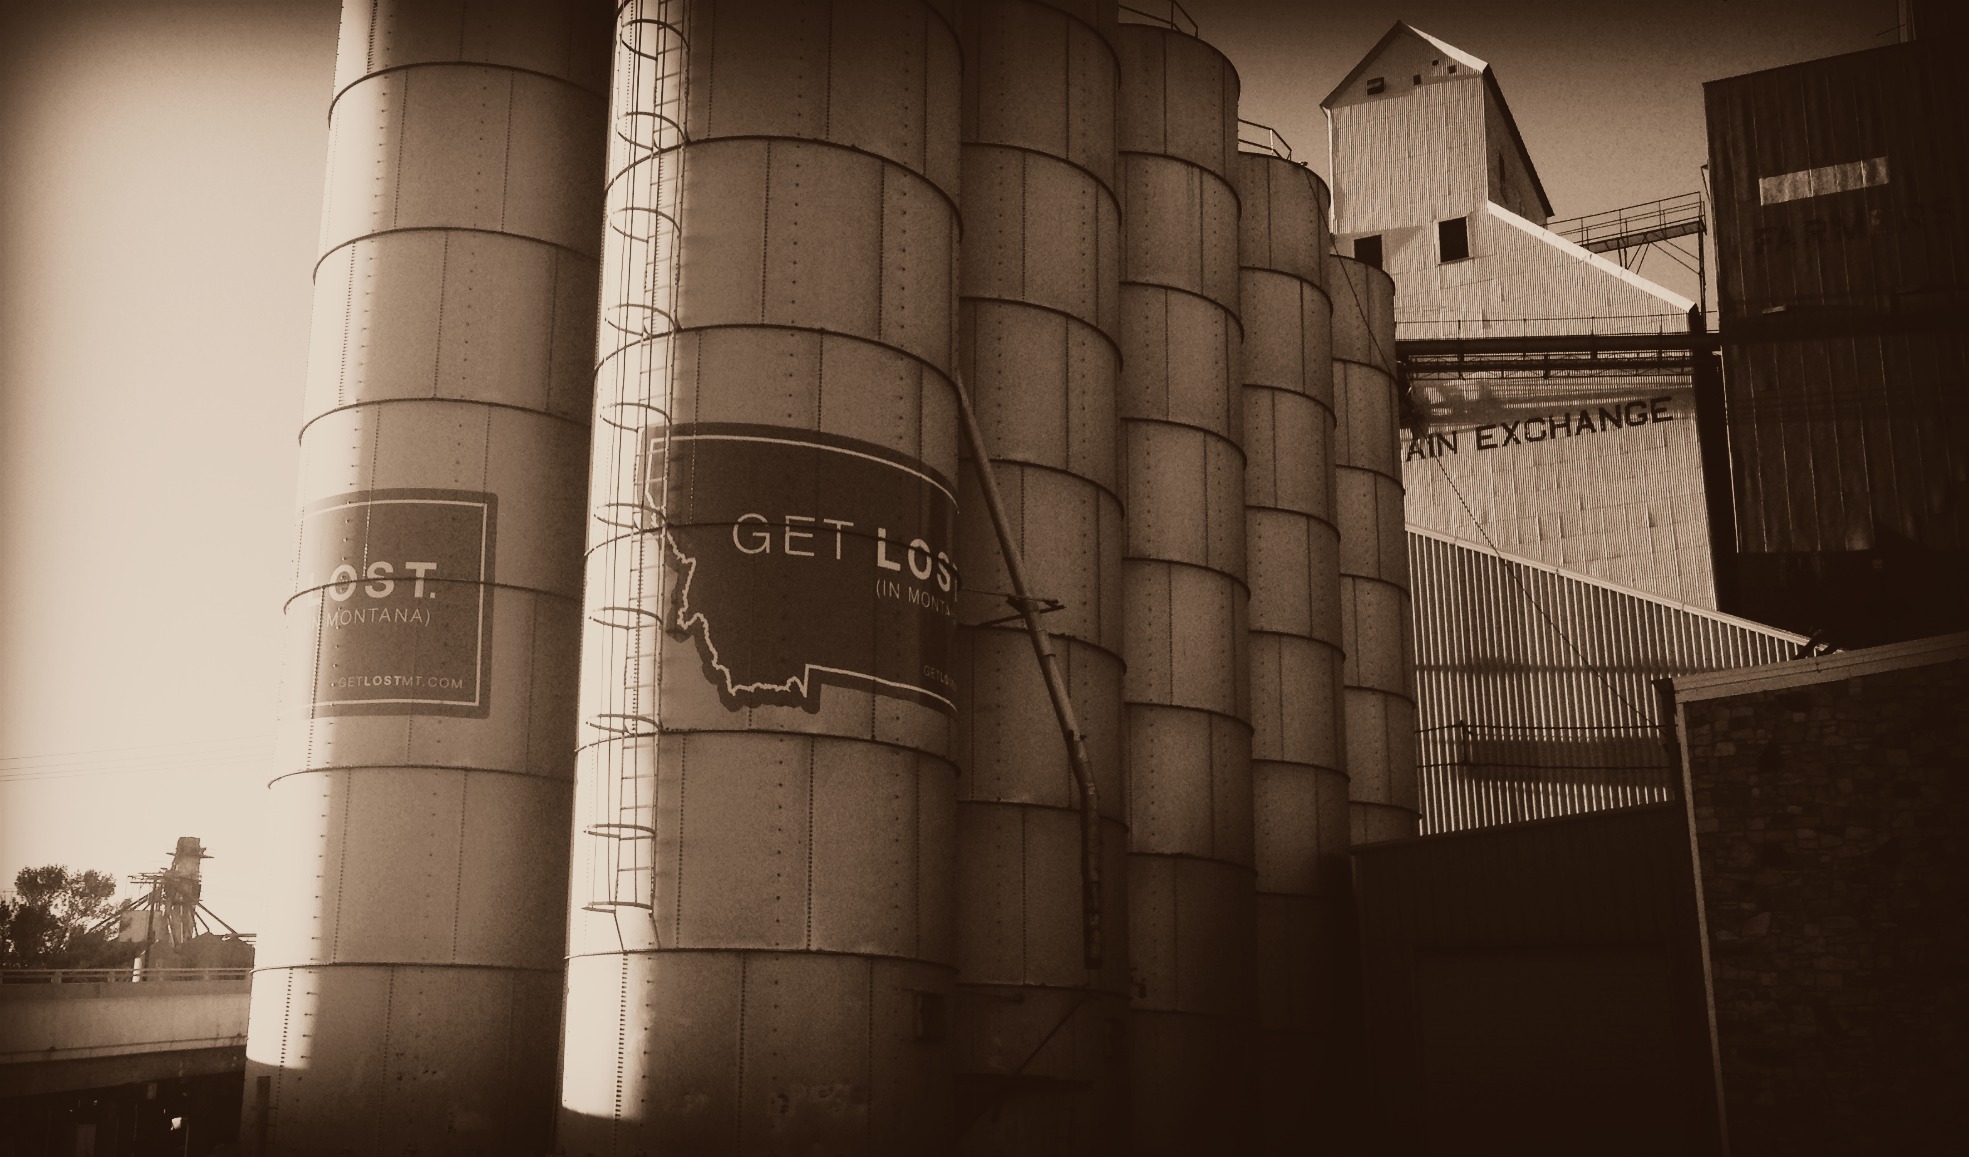 Get Lost in Montana silos